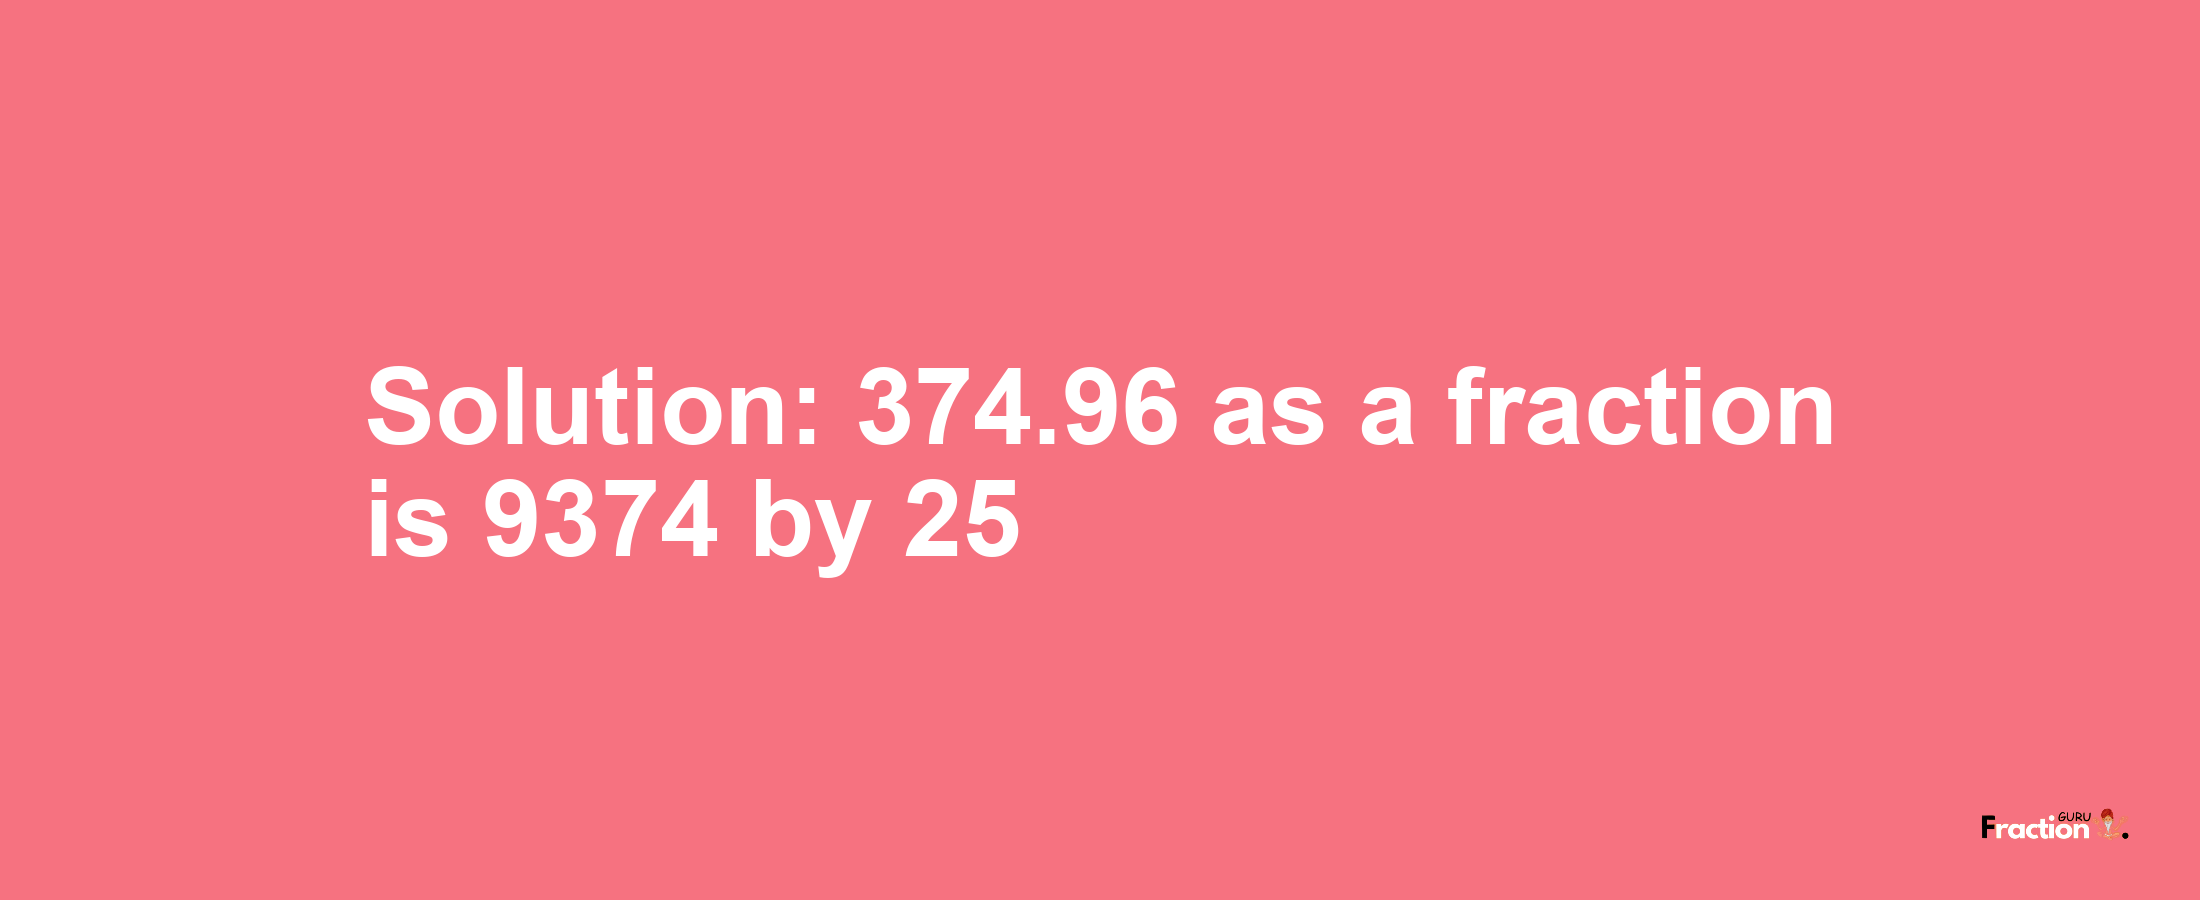 Solution:374.96 as a fraction is 9374/25